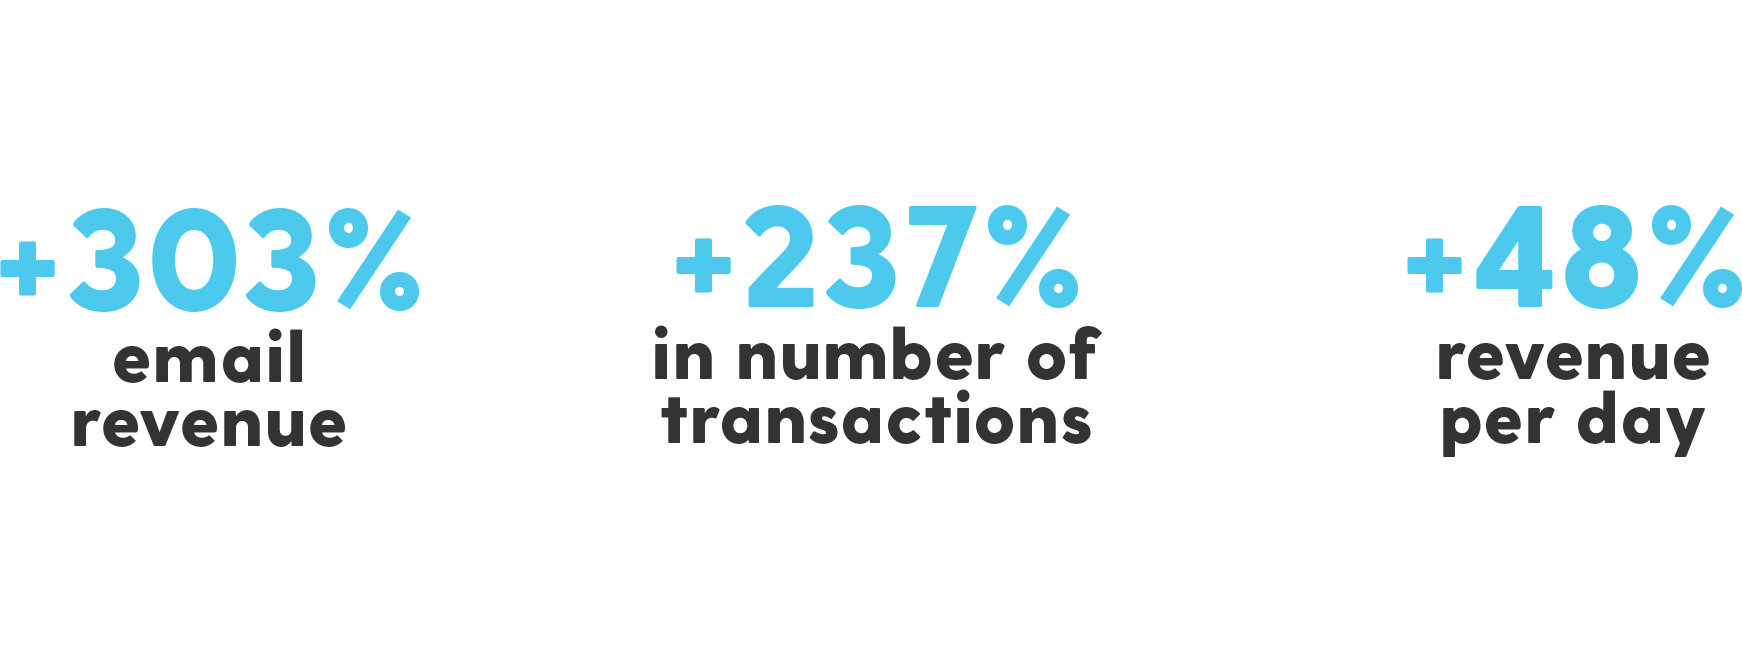 Stats indicating +303% email revenue, +237% in number of transactions, and +48% revenue per day